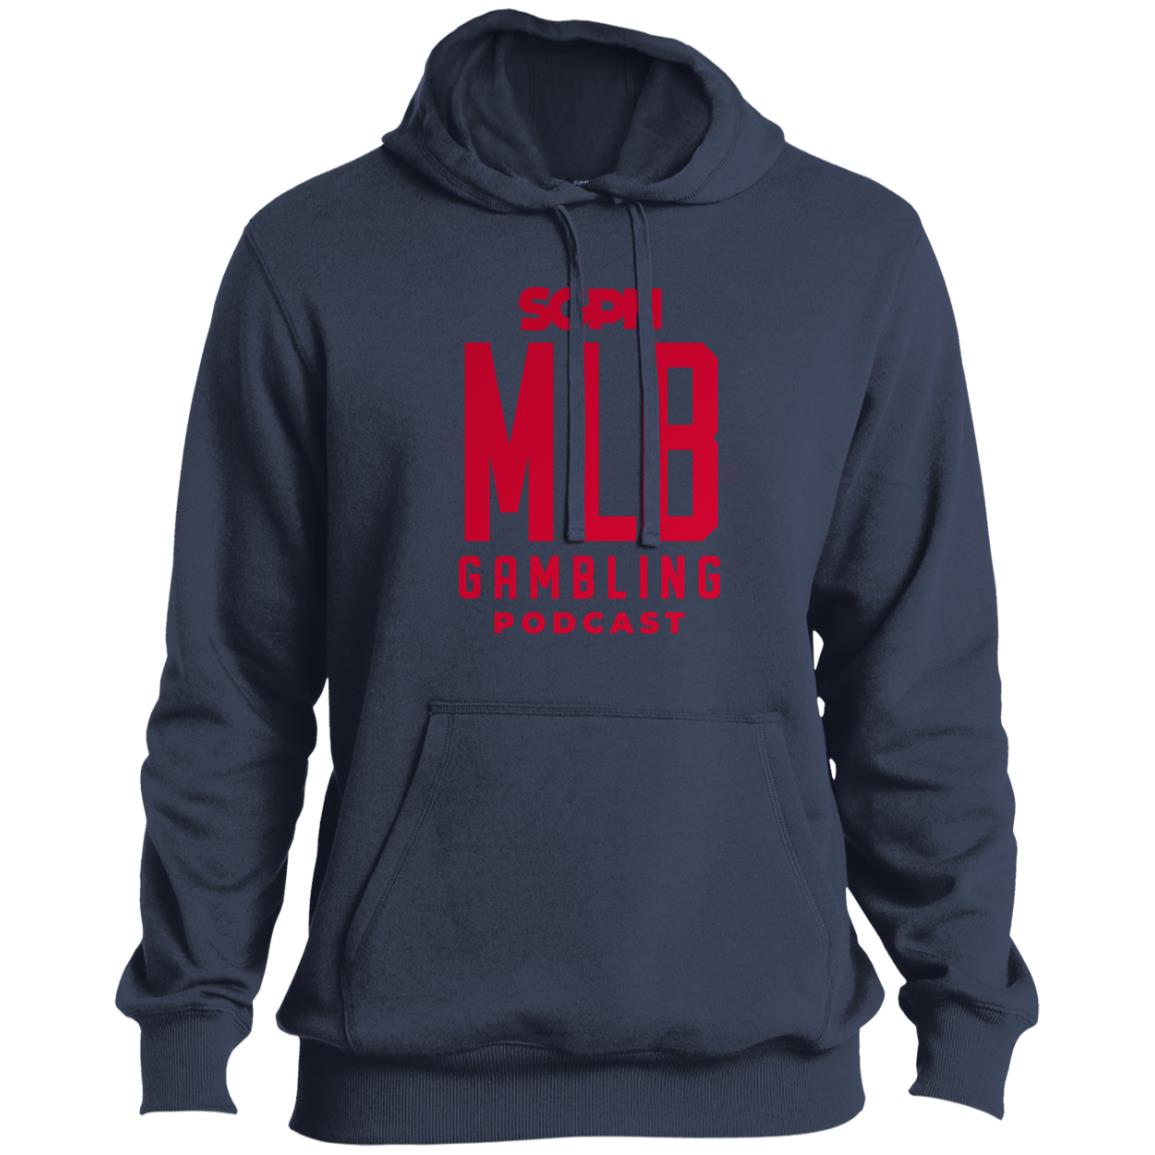 MLB Gambling Podcast Pullover Hoodie (Red Logo)